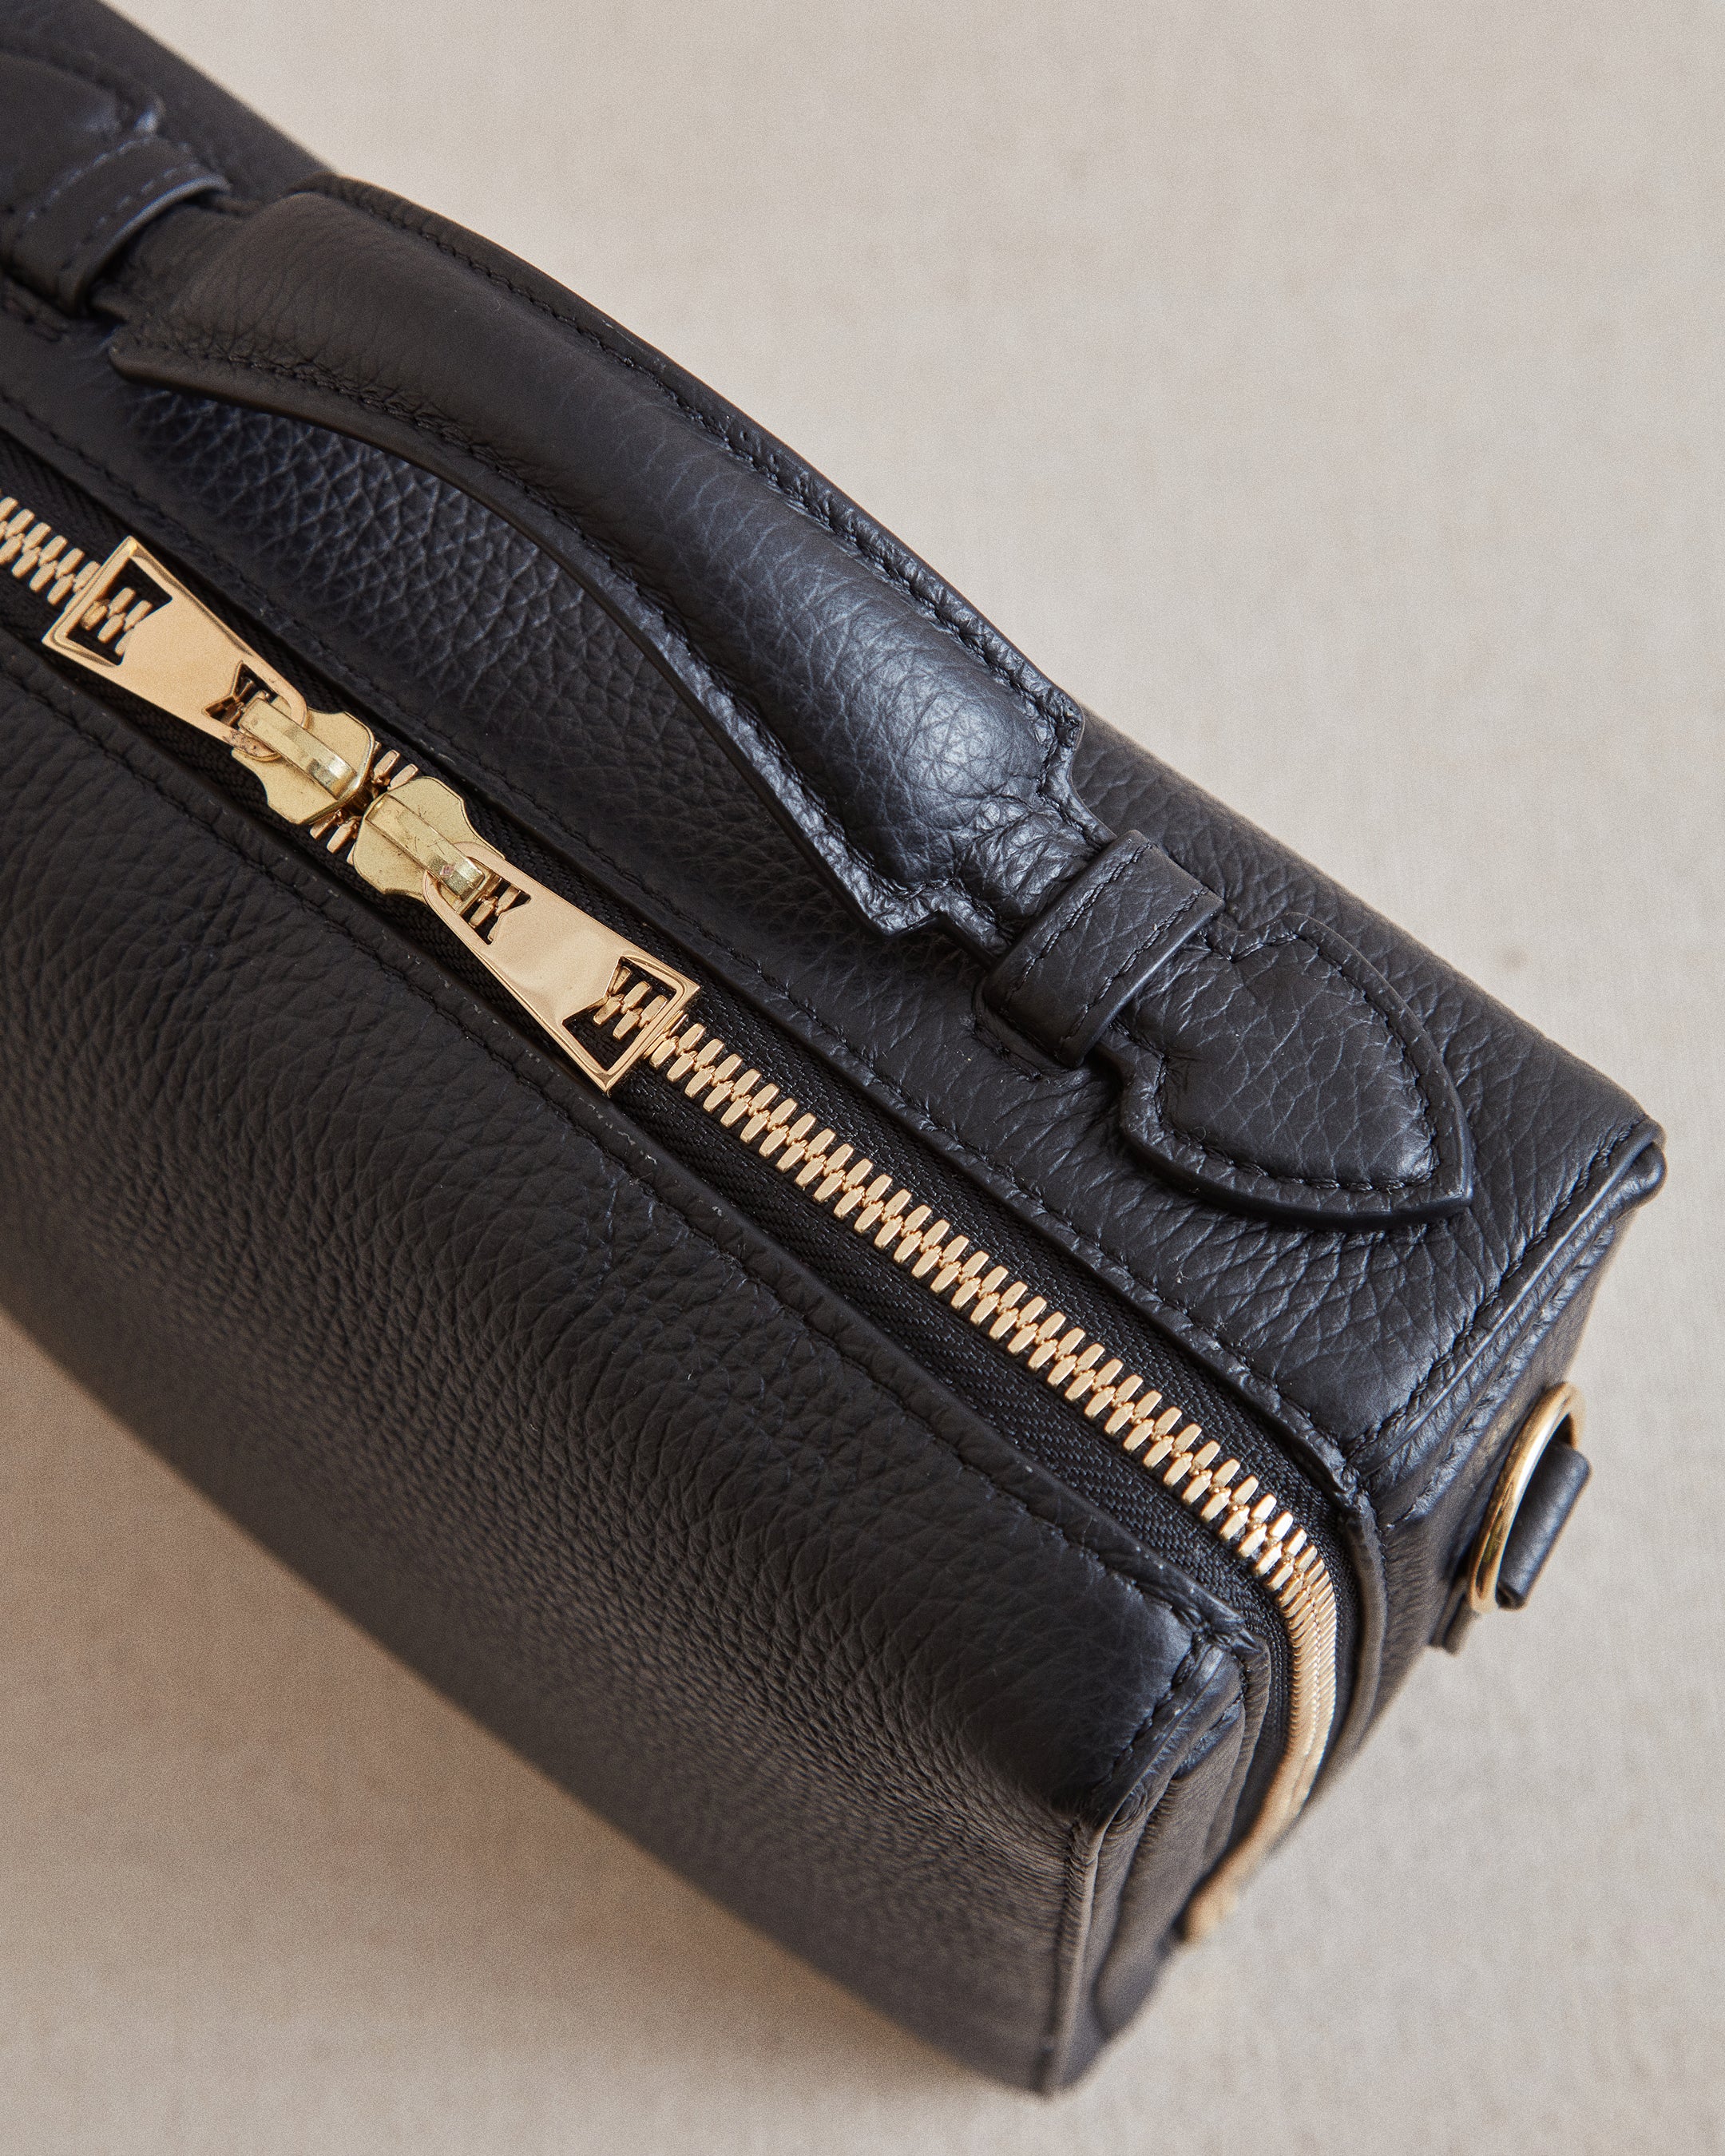 Washbag with Double Zip in Panama in black